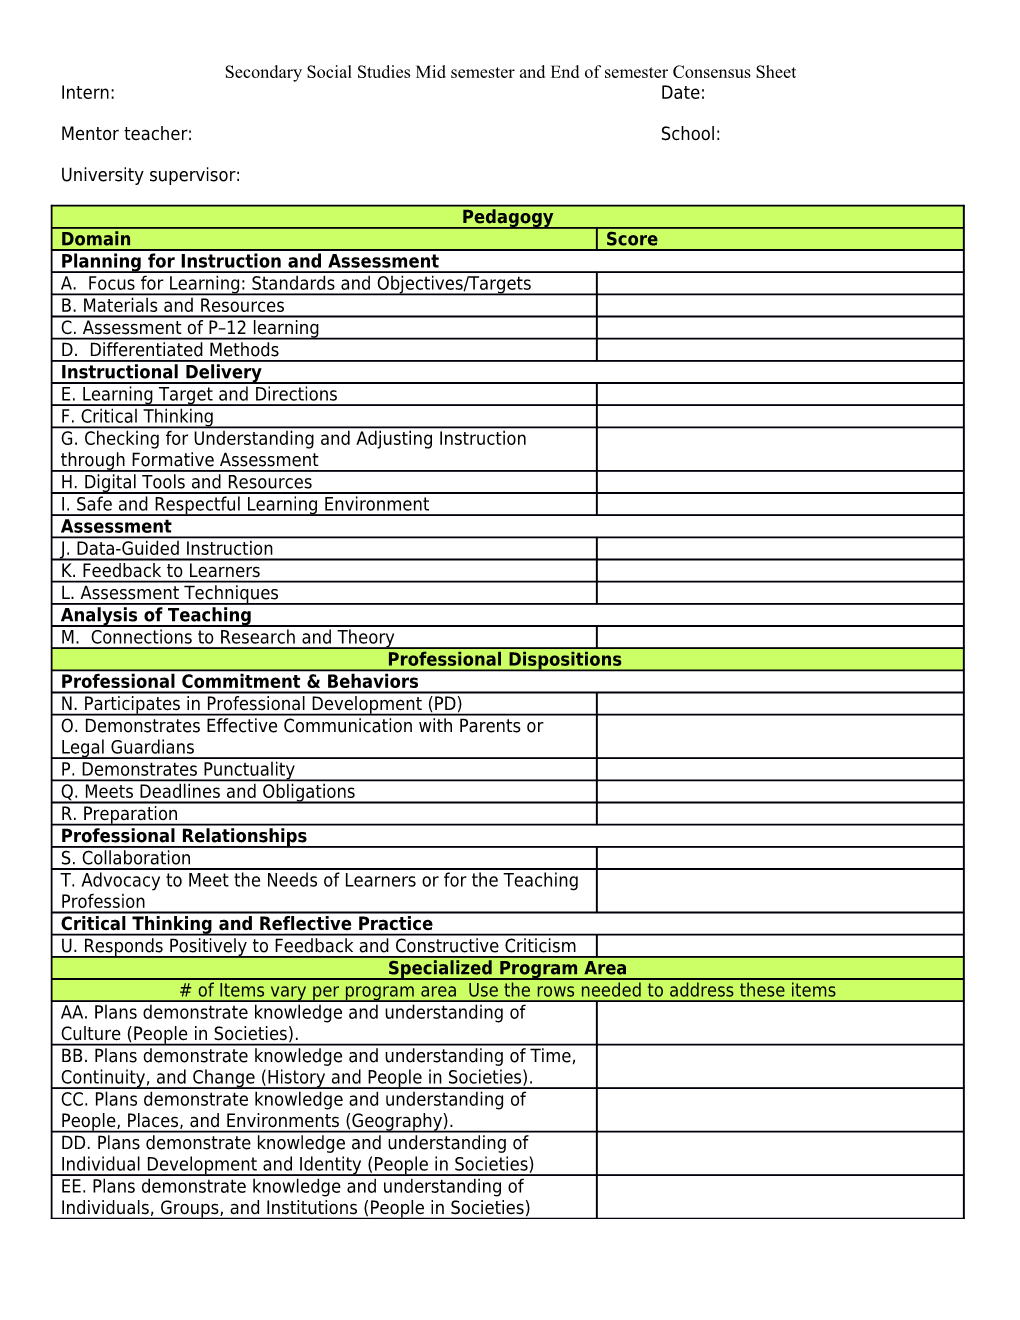 Secondary Social Studies Mid Semester and End of Semester Consensus Sheet